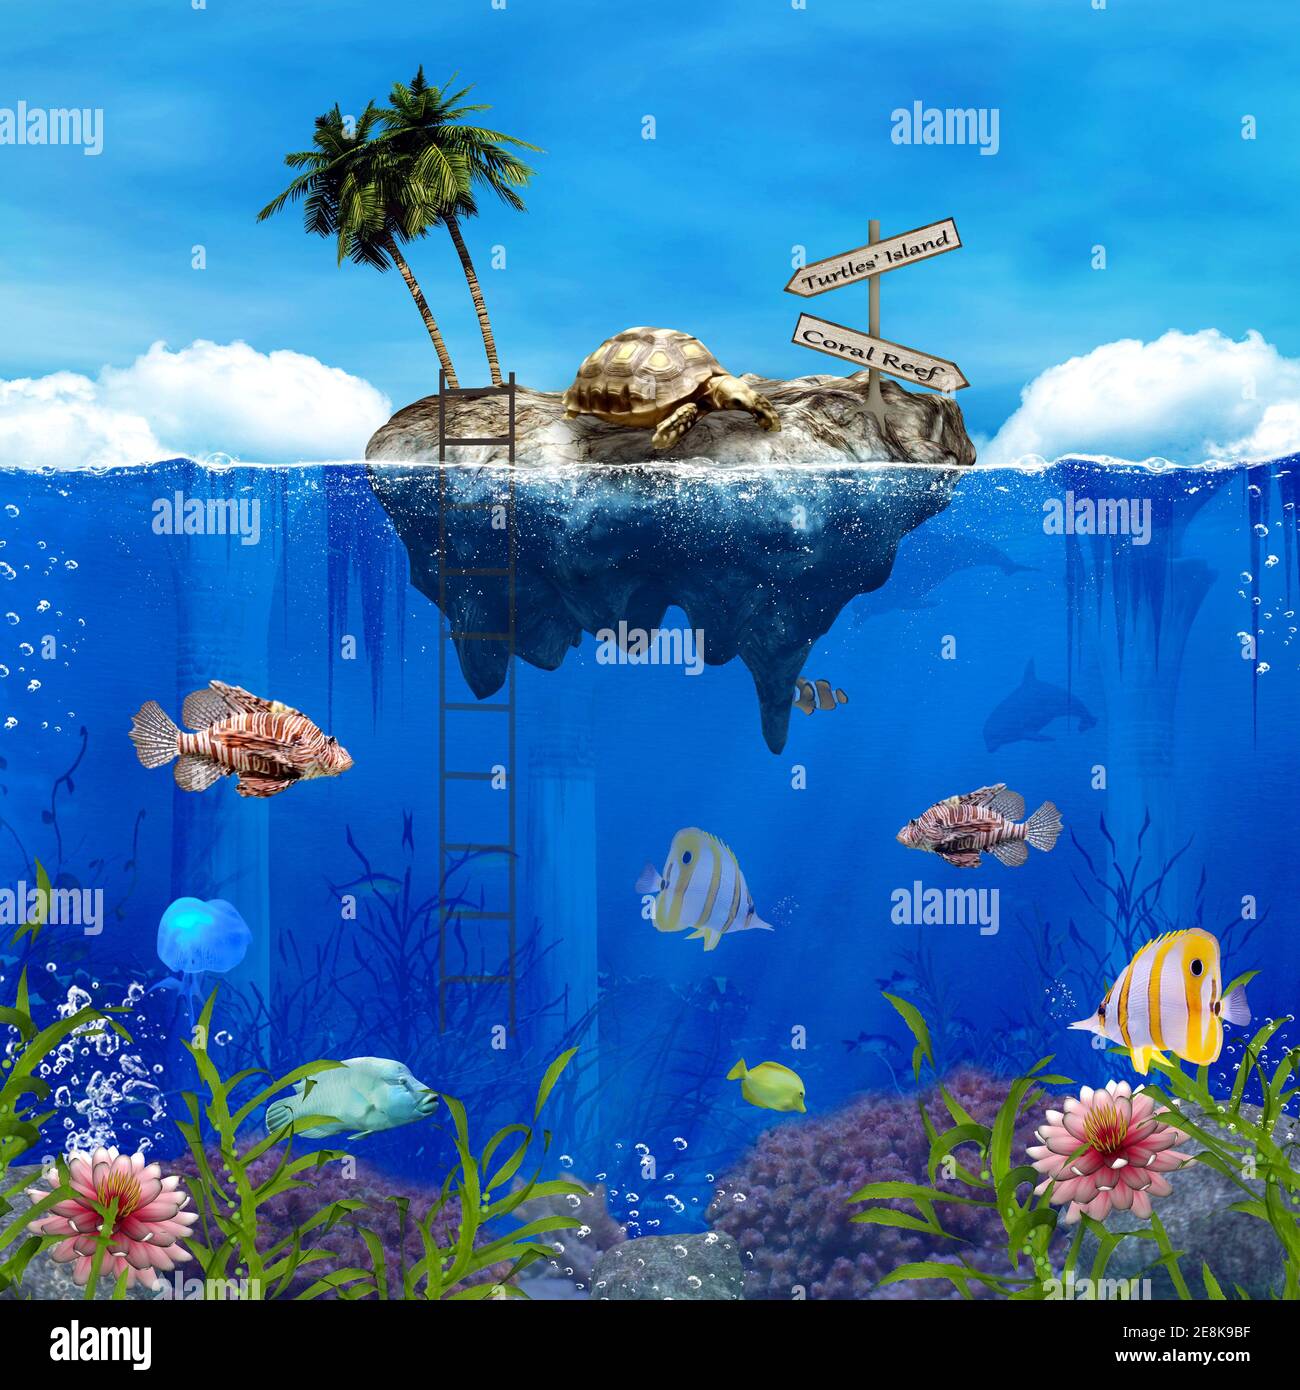 Fantasy turtles island by the coral reef Stock Photo